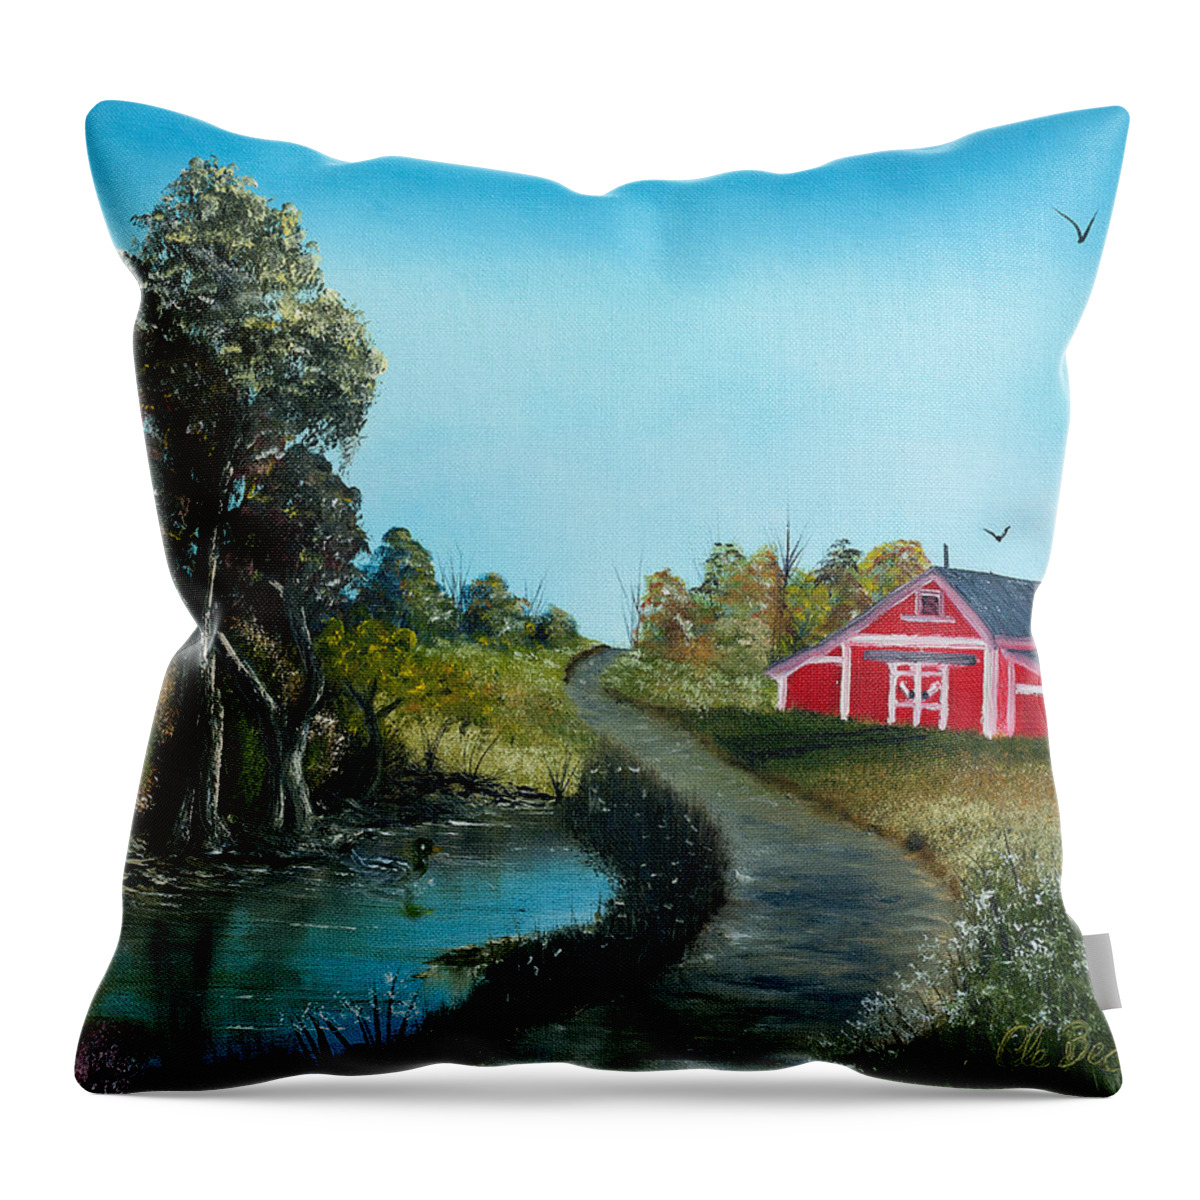 Pond Throw Pillow featuring the painting The Pond By The Red Barn by Claude Beaulac